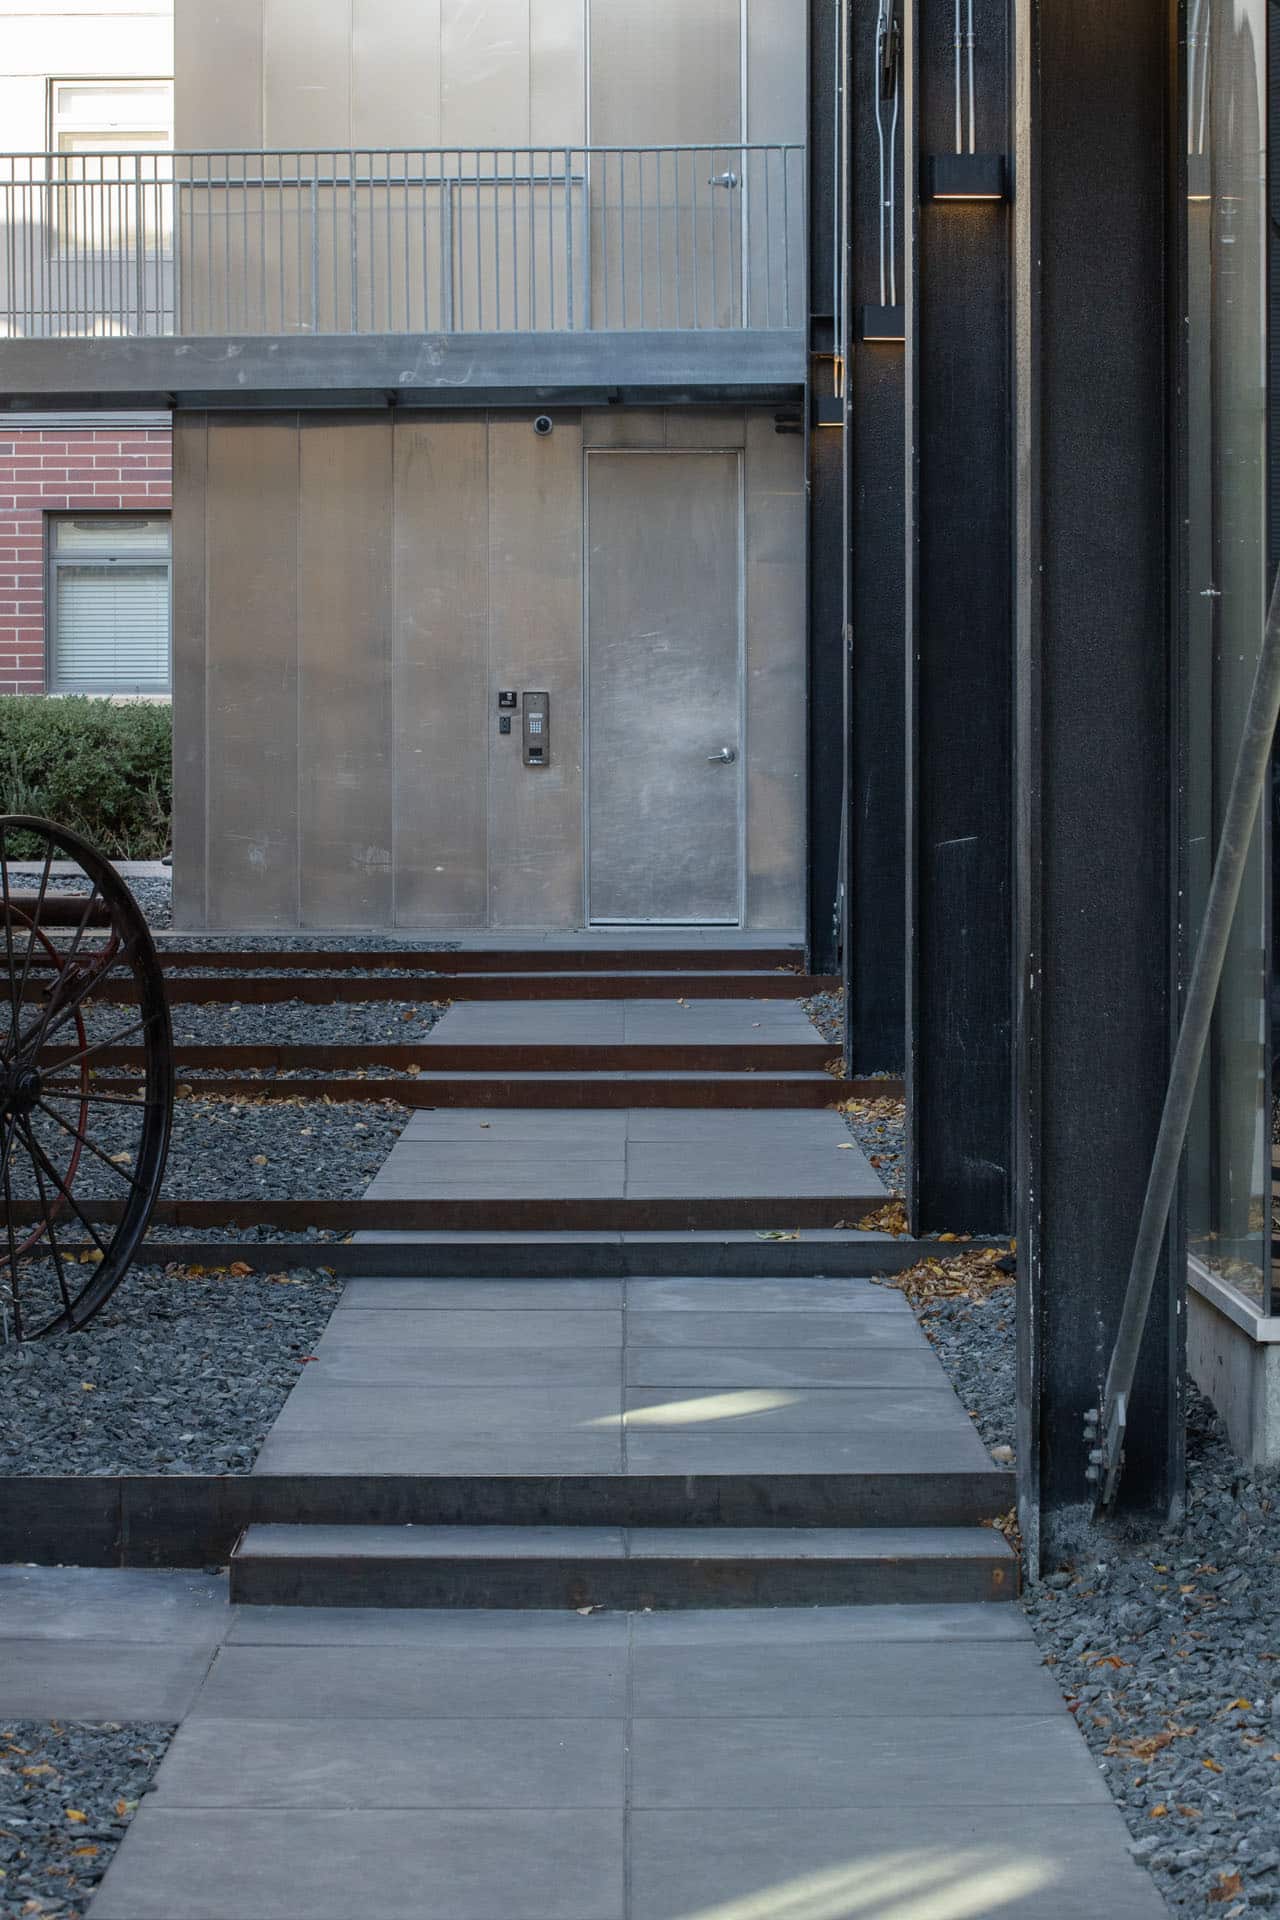 A detail of a modern landscaped downtown alley pathway, between a business building and residential condos, with concrete slate steps and gravel.